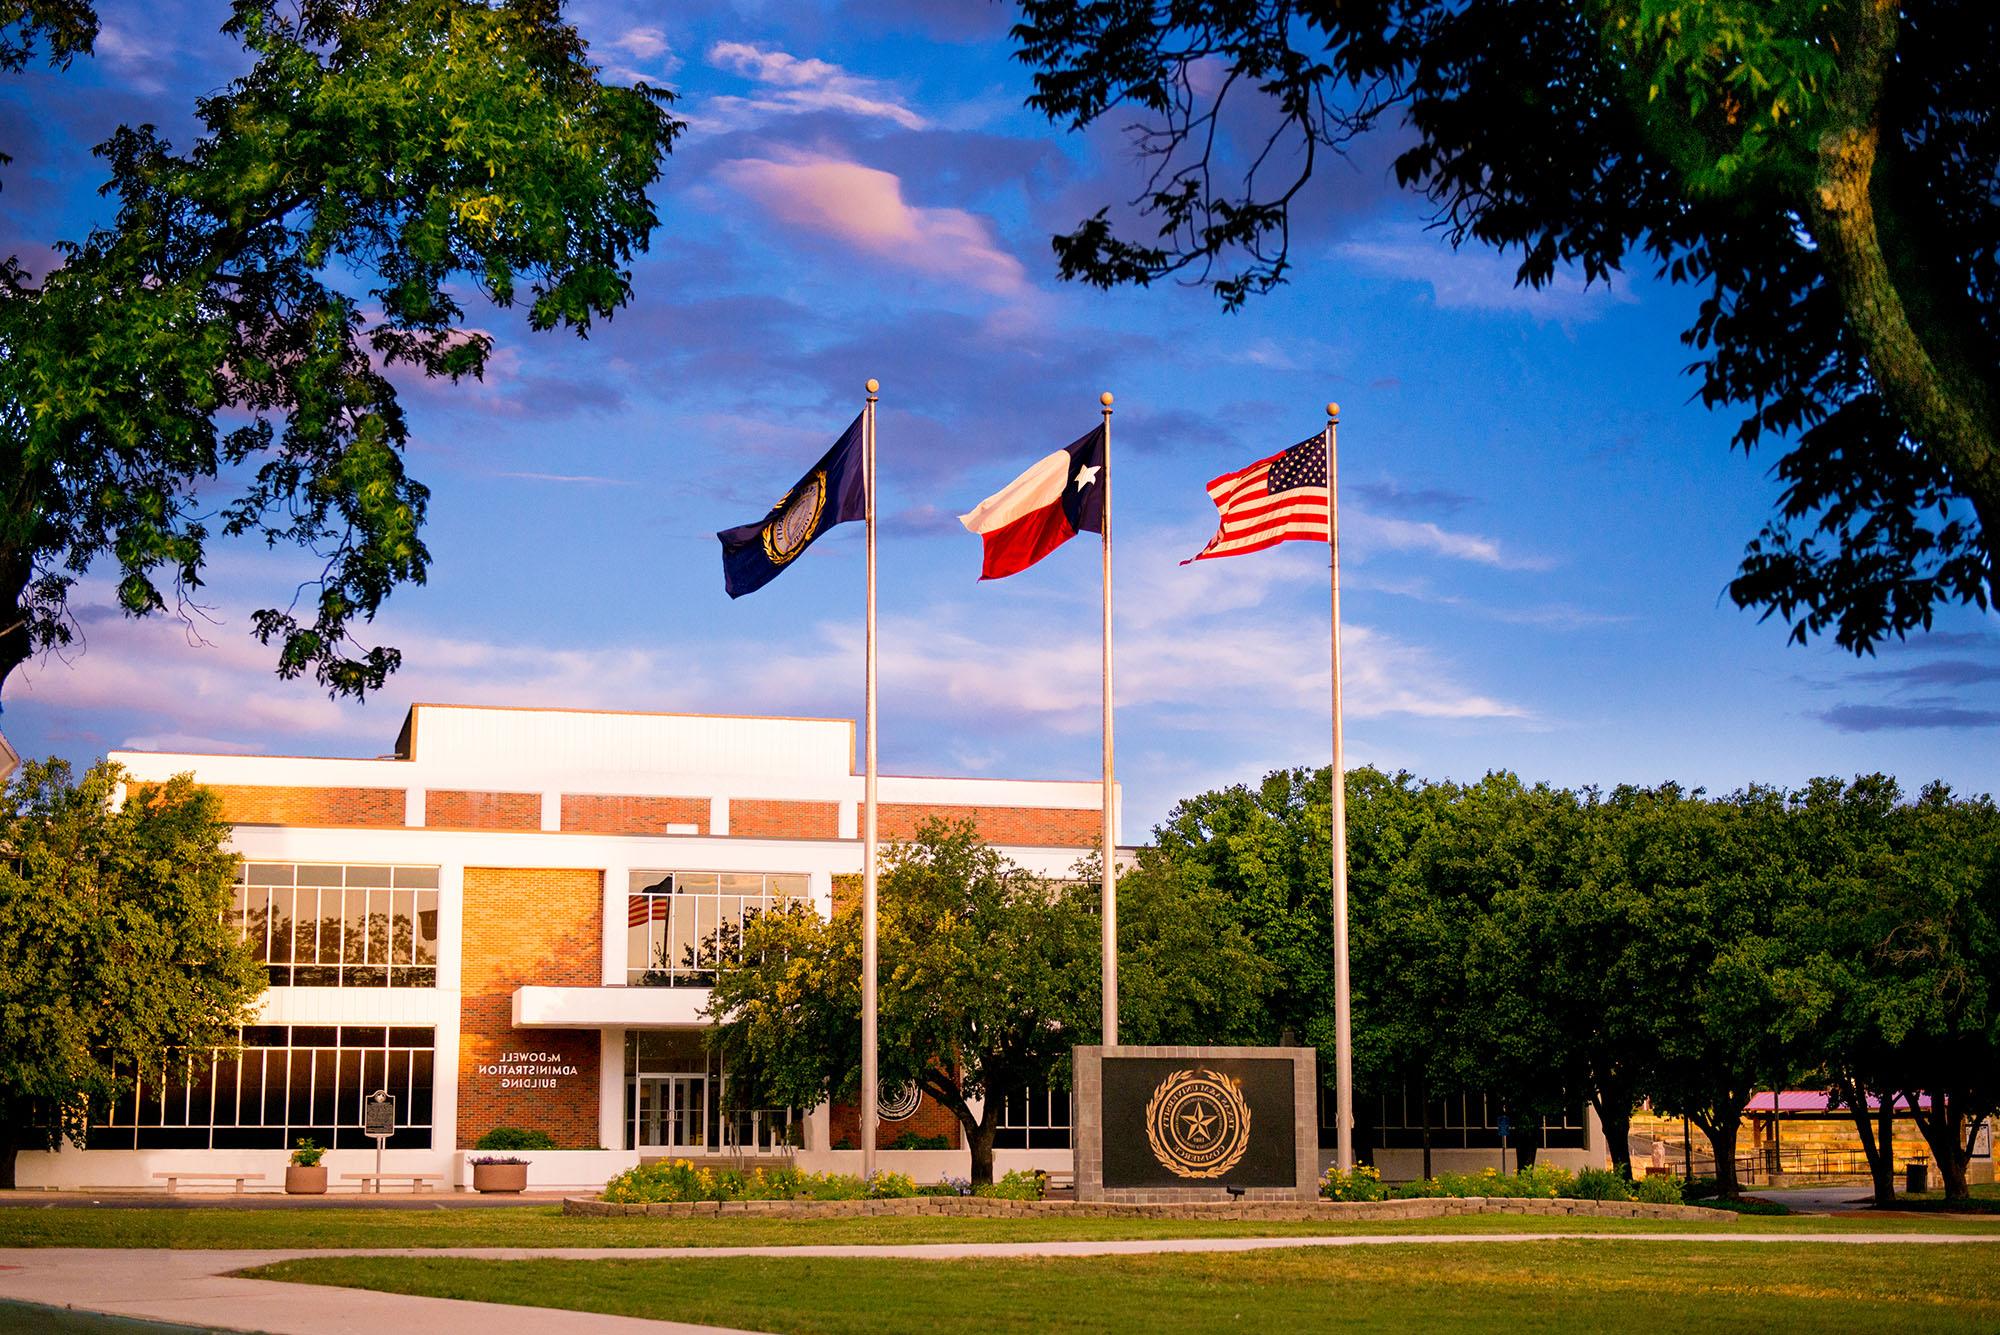 The business building with three flags in front of it.